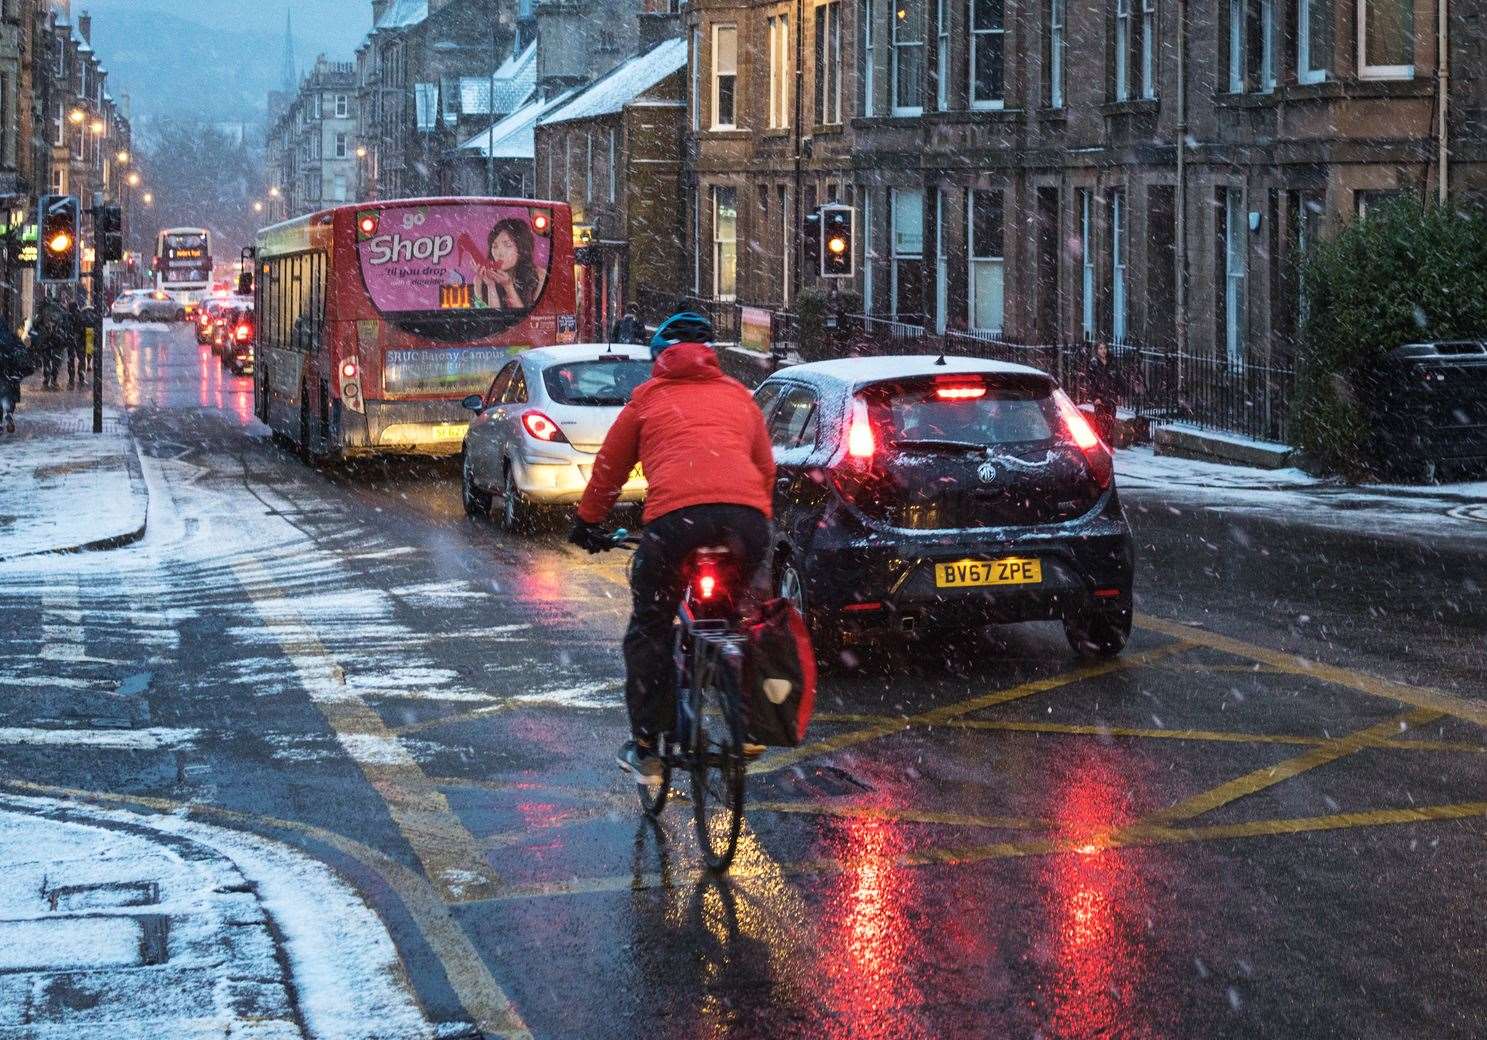 There is fresh guidance for cyclists to help them remain visible in traffic